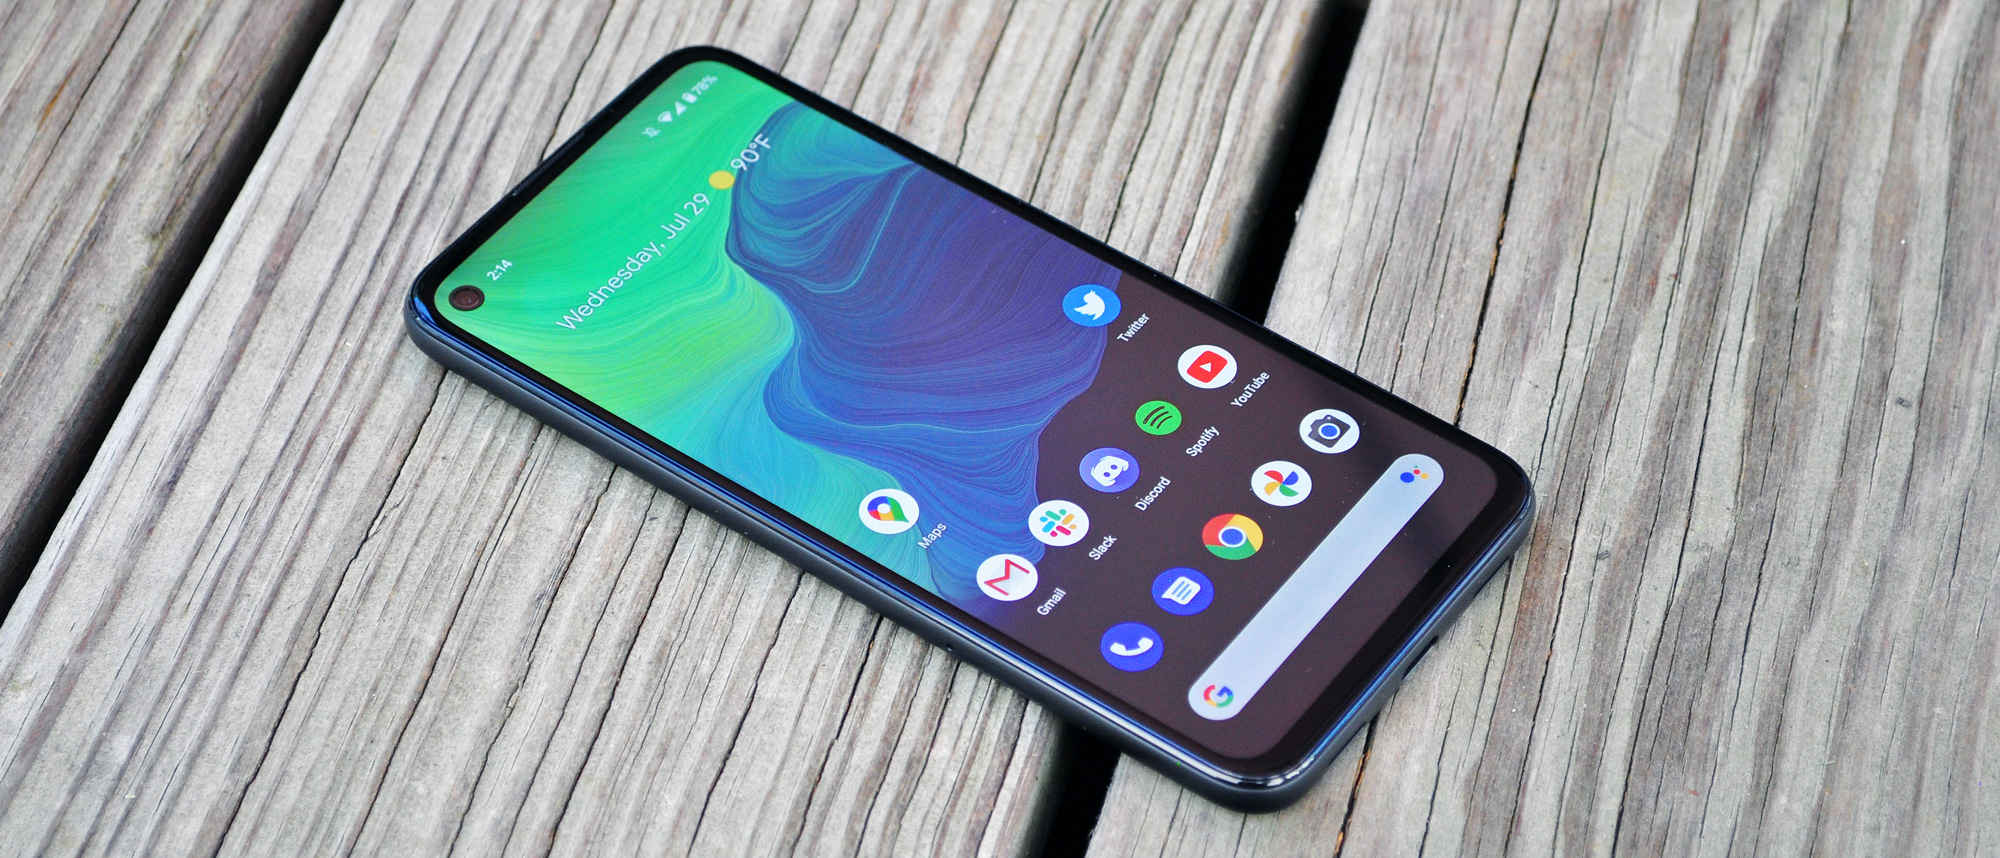 Google Pixel 4a review: Still shockingly good for $349 | Tom's Guide